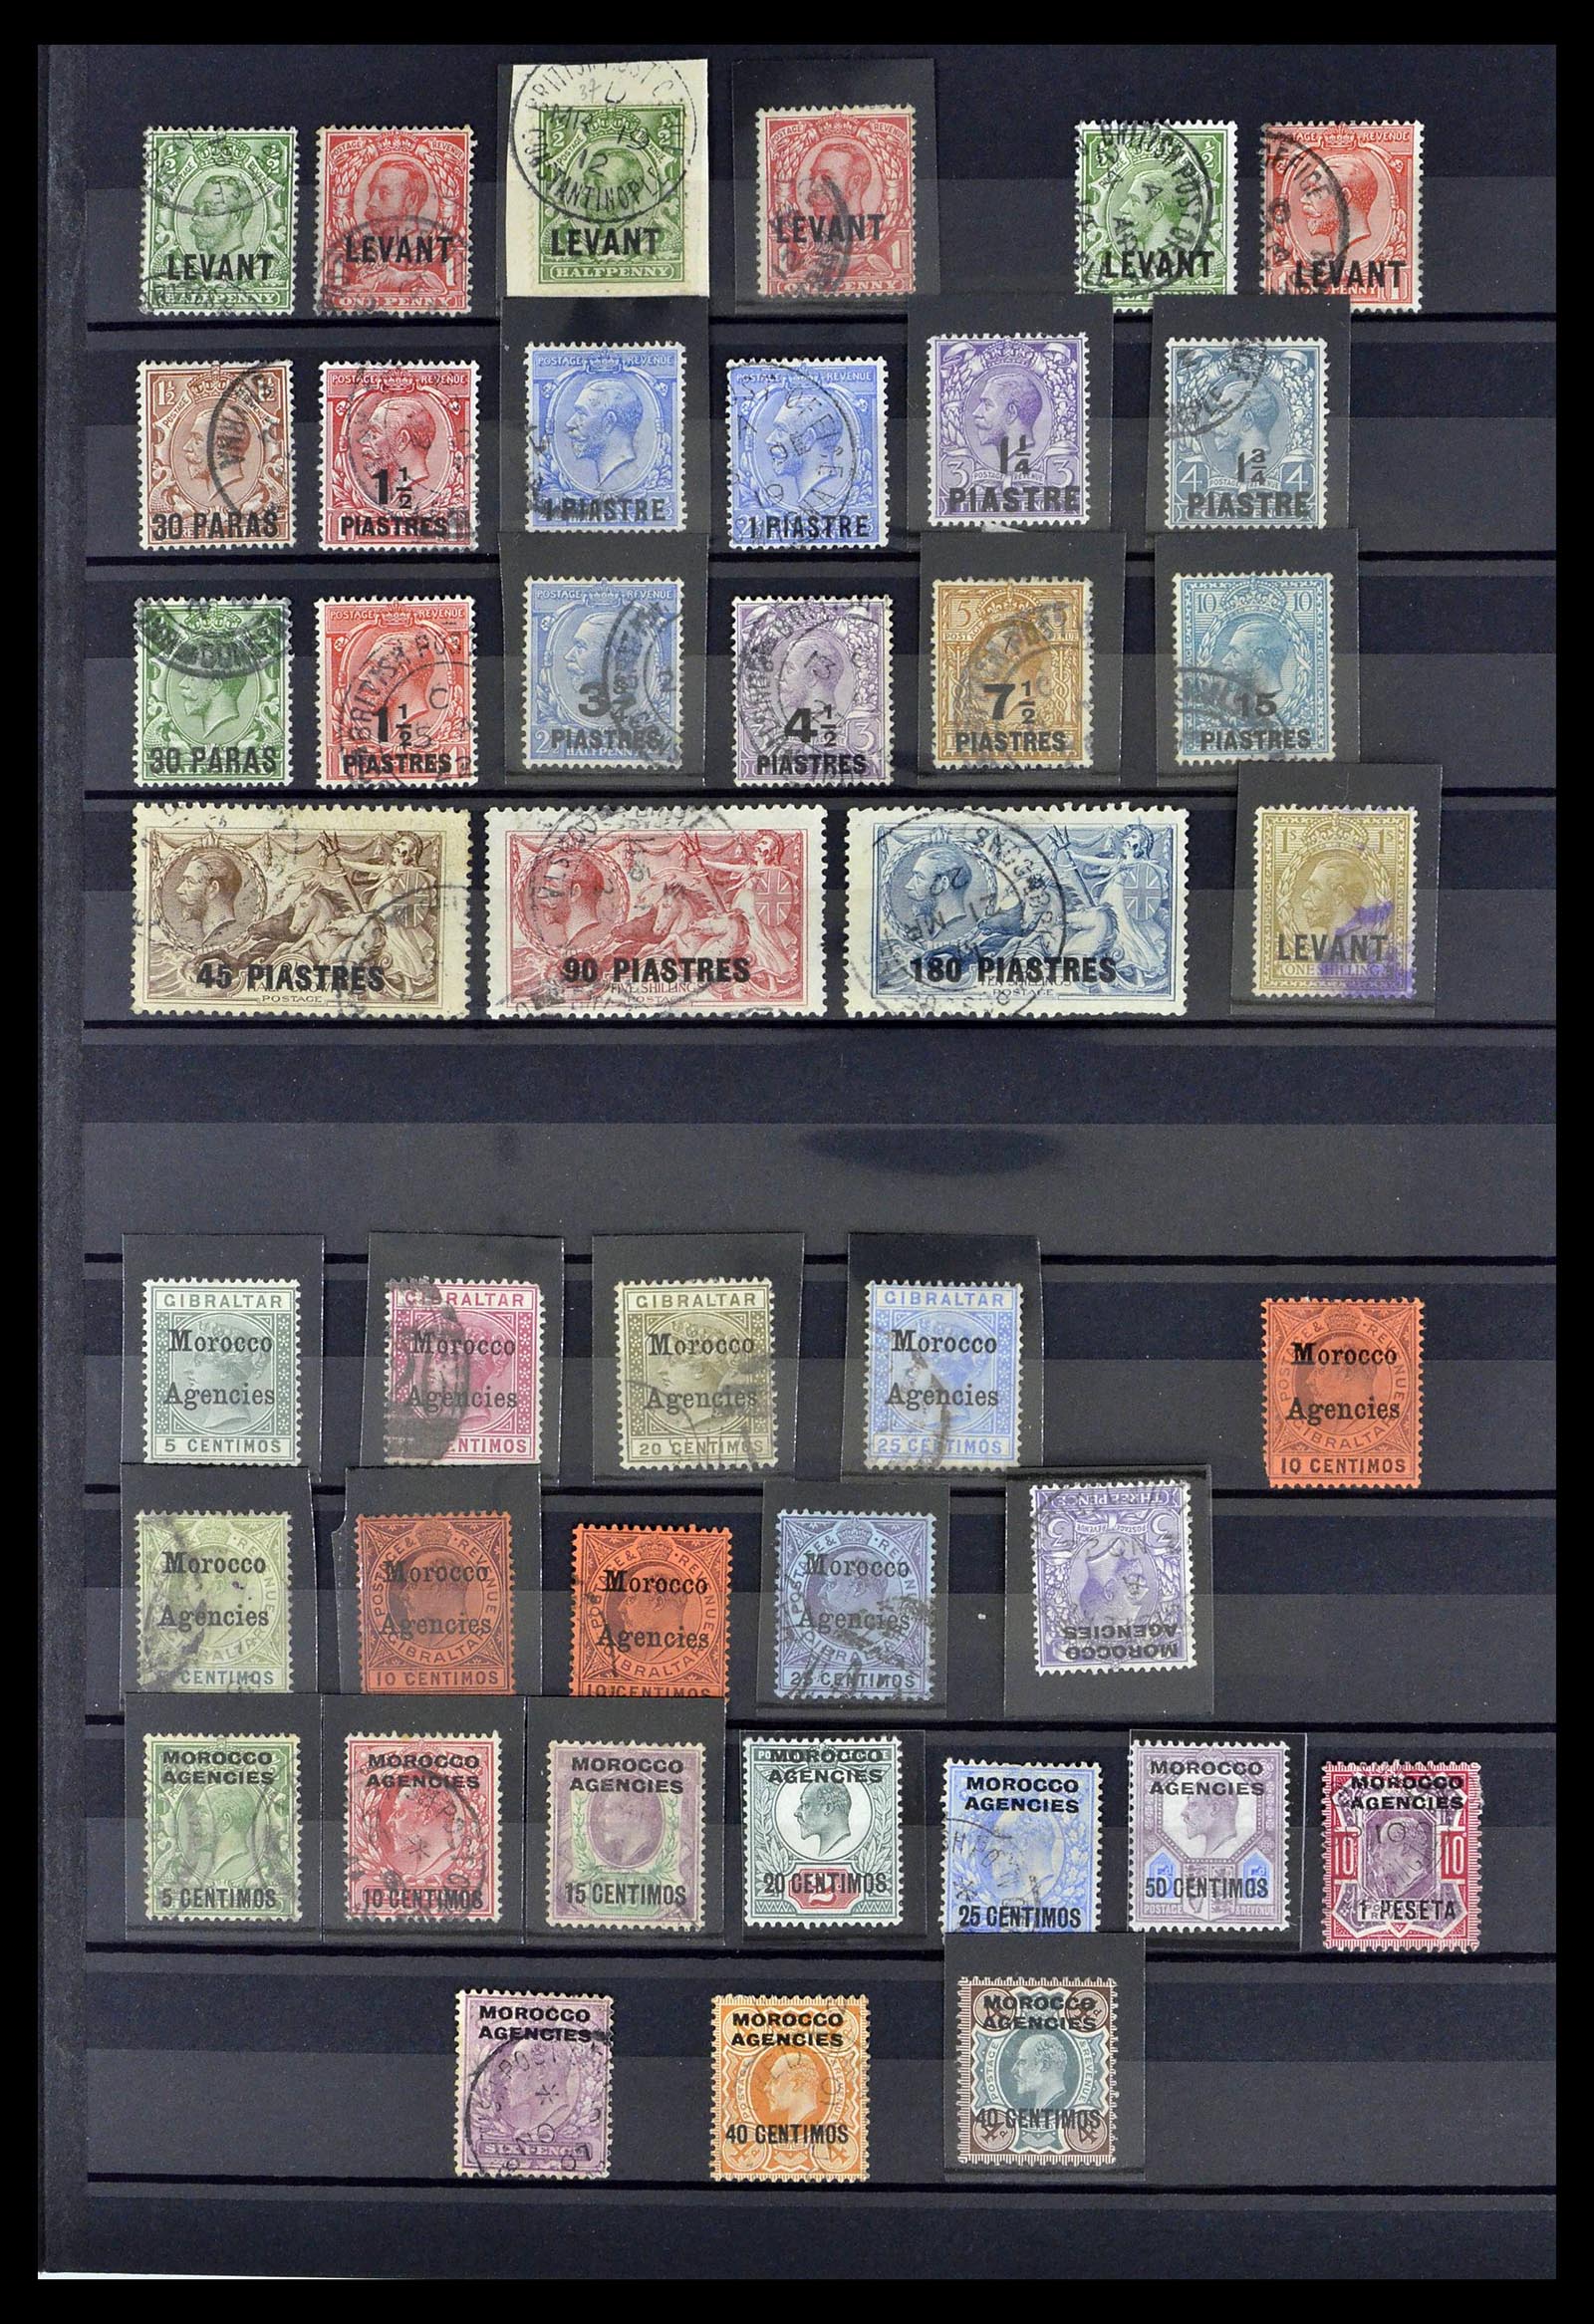 39409 0002 - Stamp collection 39409 British offices abroad 1885-1957.